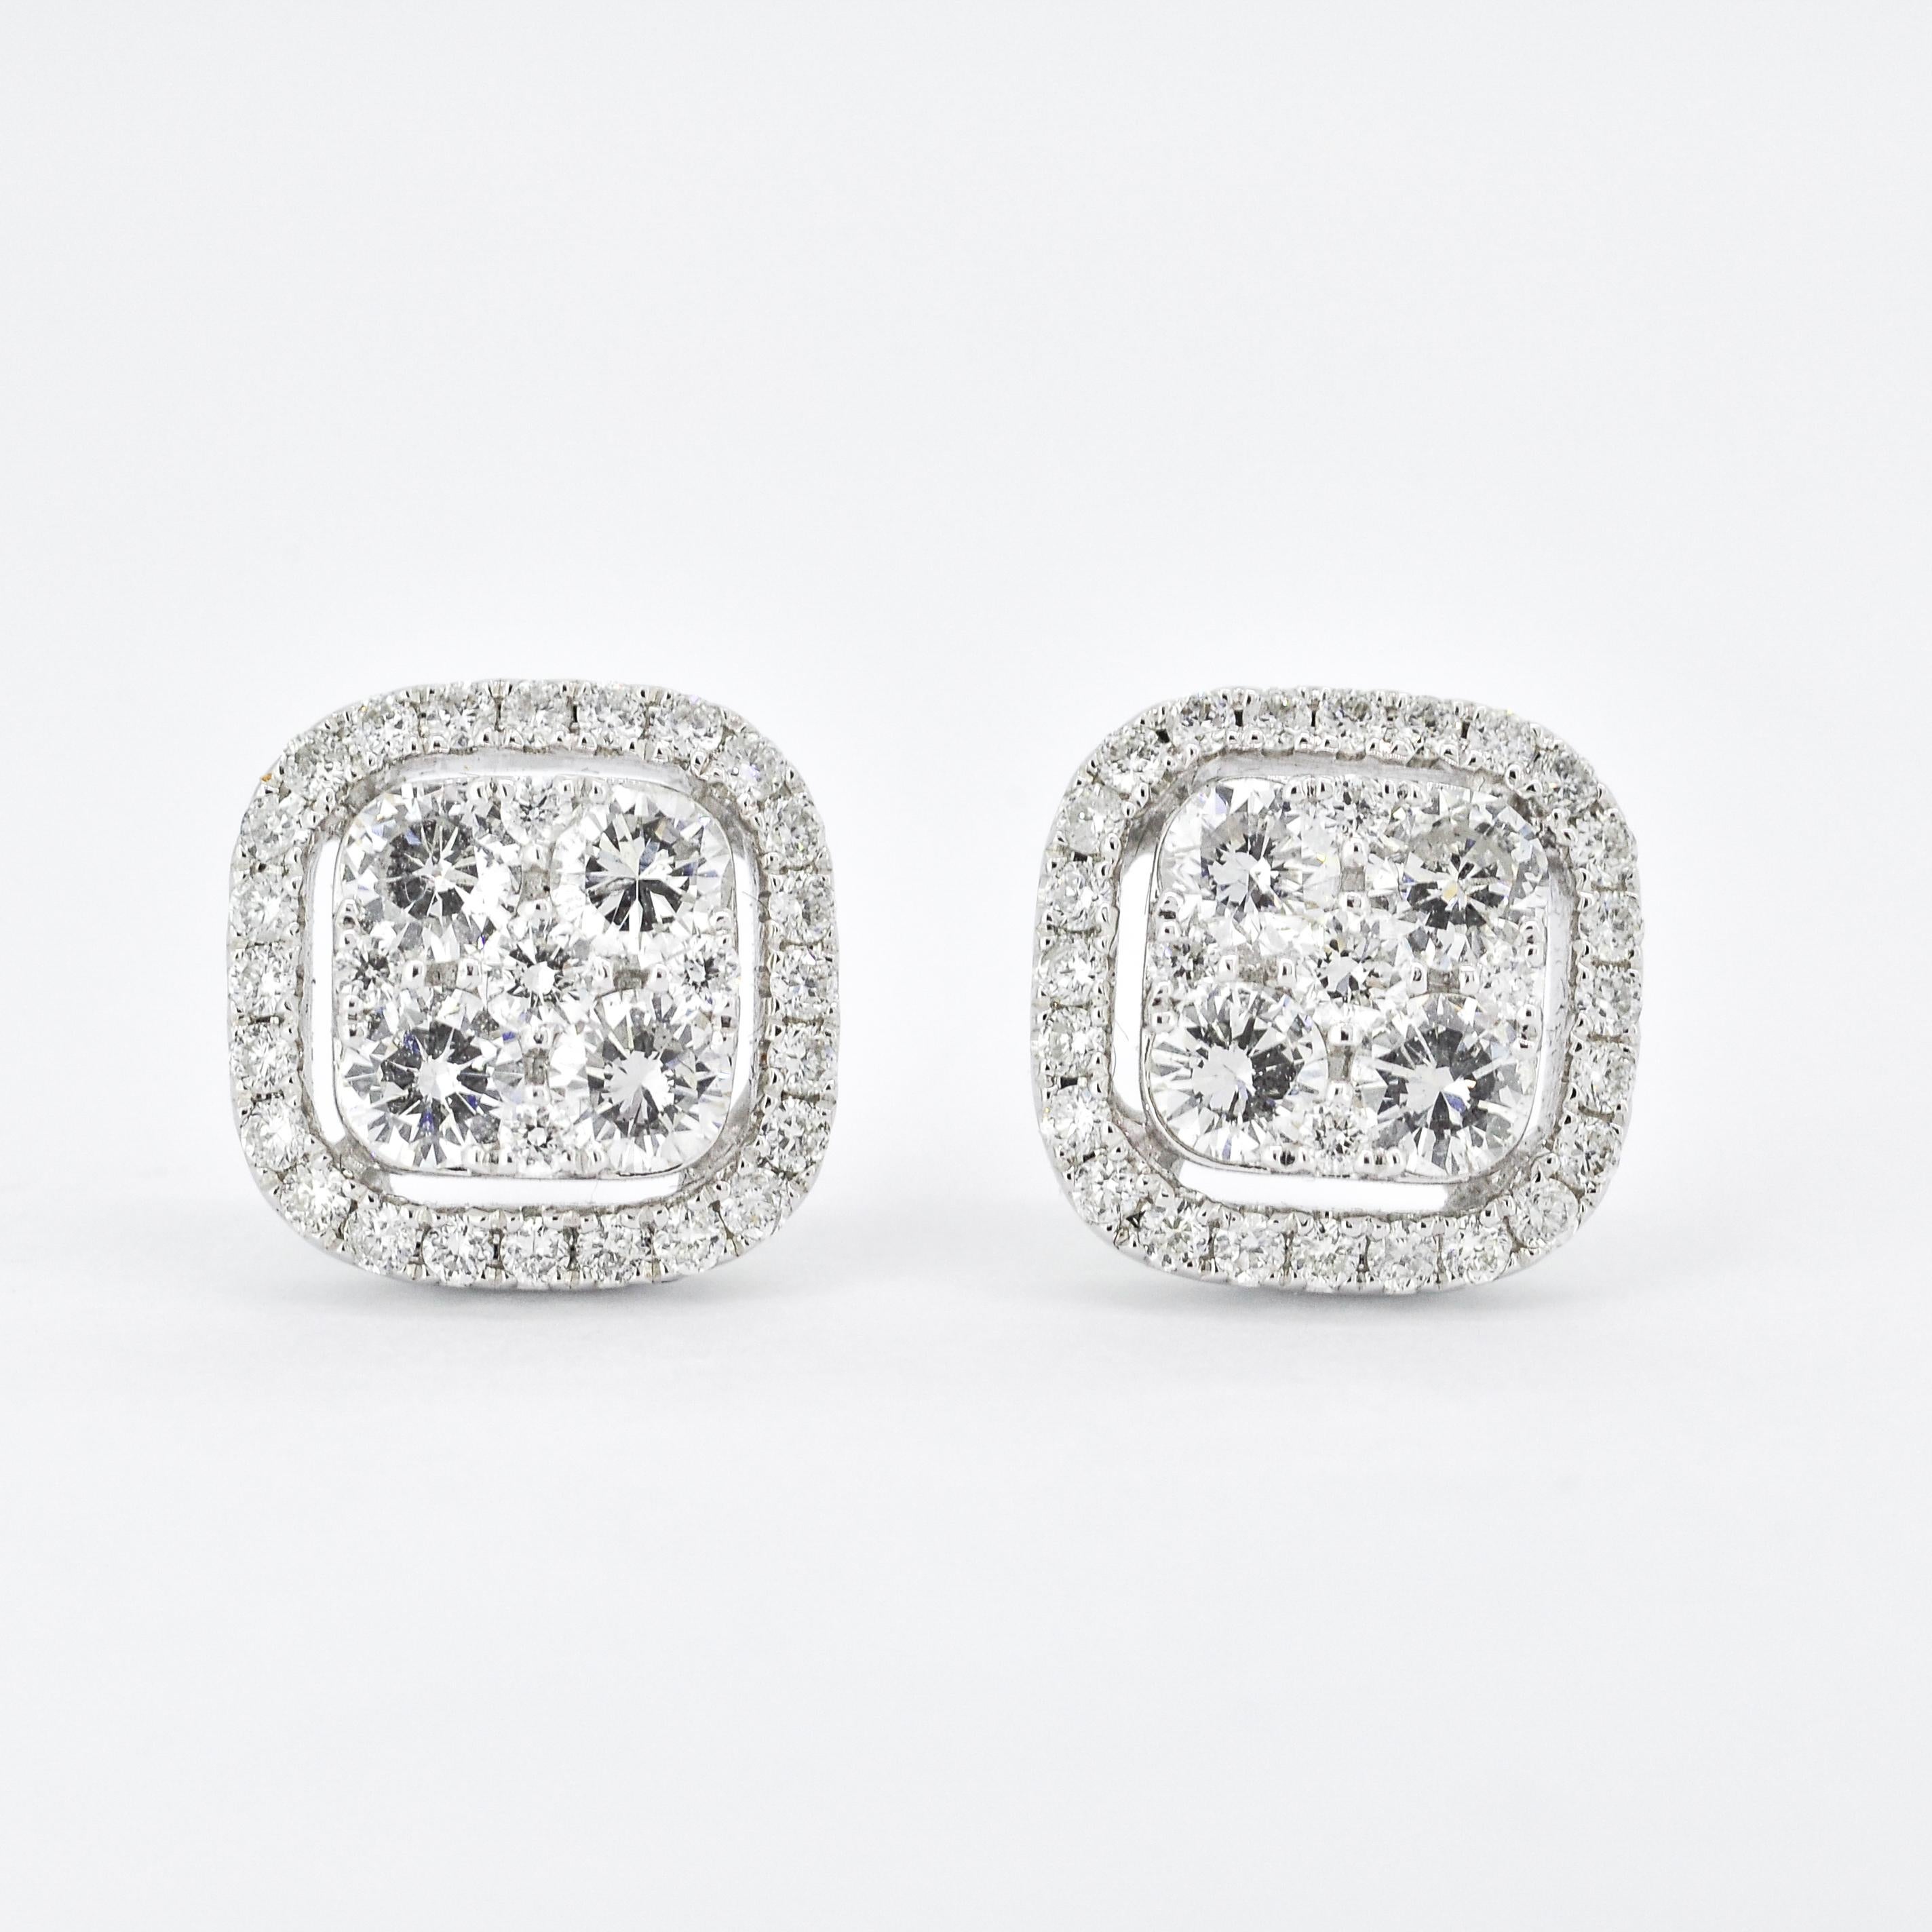 These stunning stud earrings are designed to captivate with their exquisite beauty. They feature round-cut diamonds expertly arranged in sophisticated cushion square clusters. The clusters create a visually striking pattern that adds a touch of